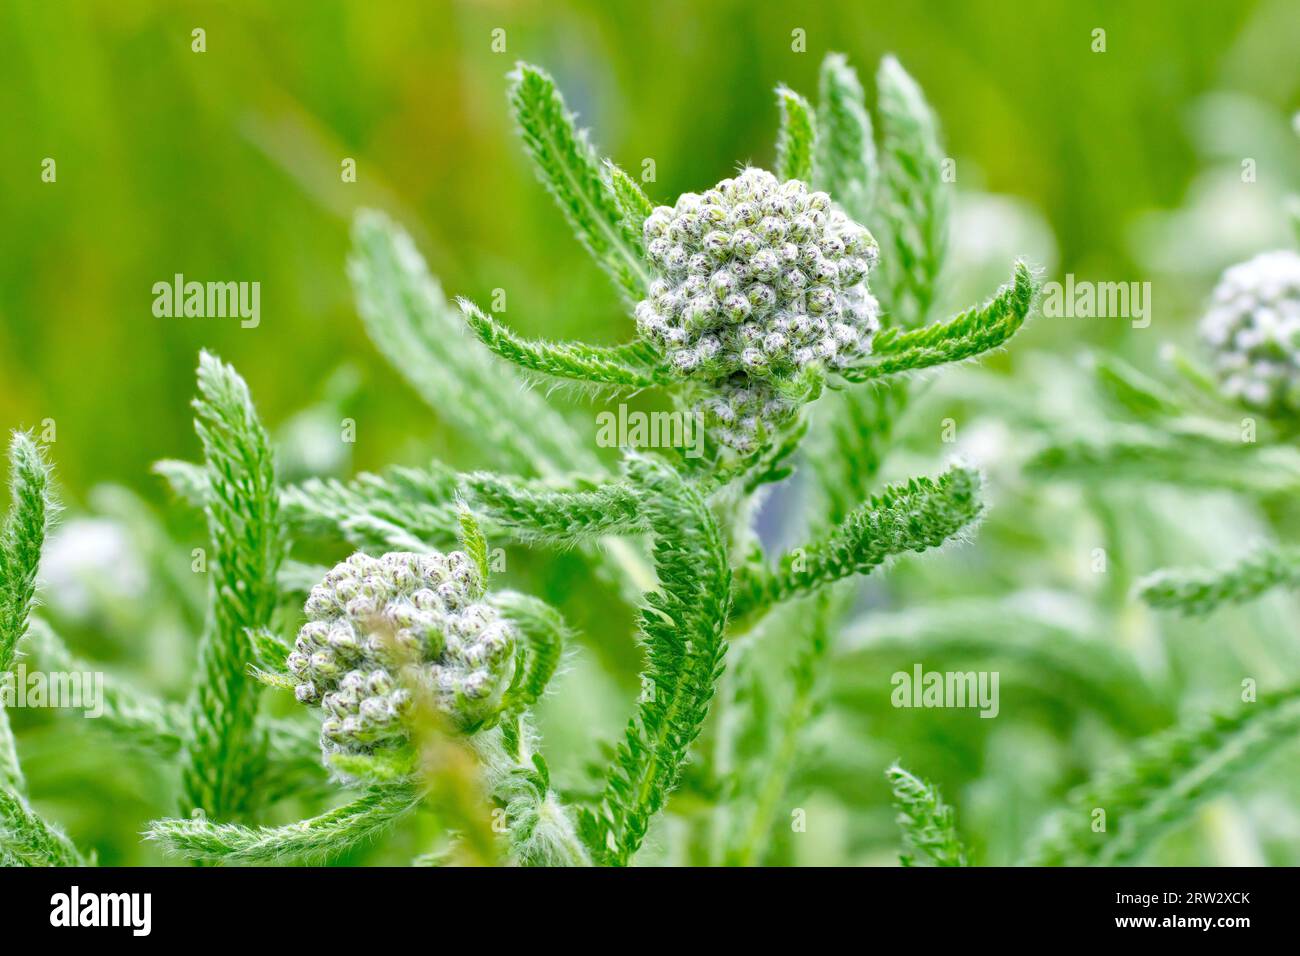 Yarrow (achillea millefolium), close up showing the flowerbuds on the plant and the finely cut leaves opening on the stems. Stock Photo